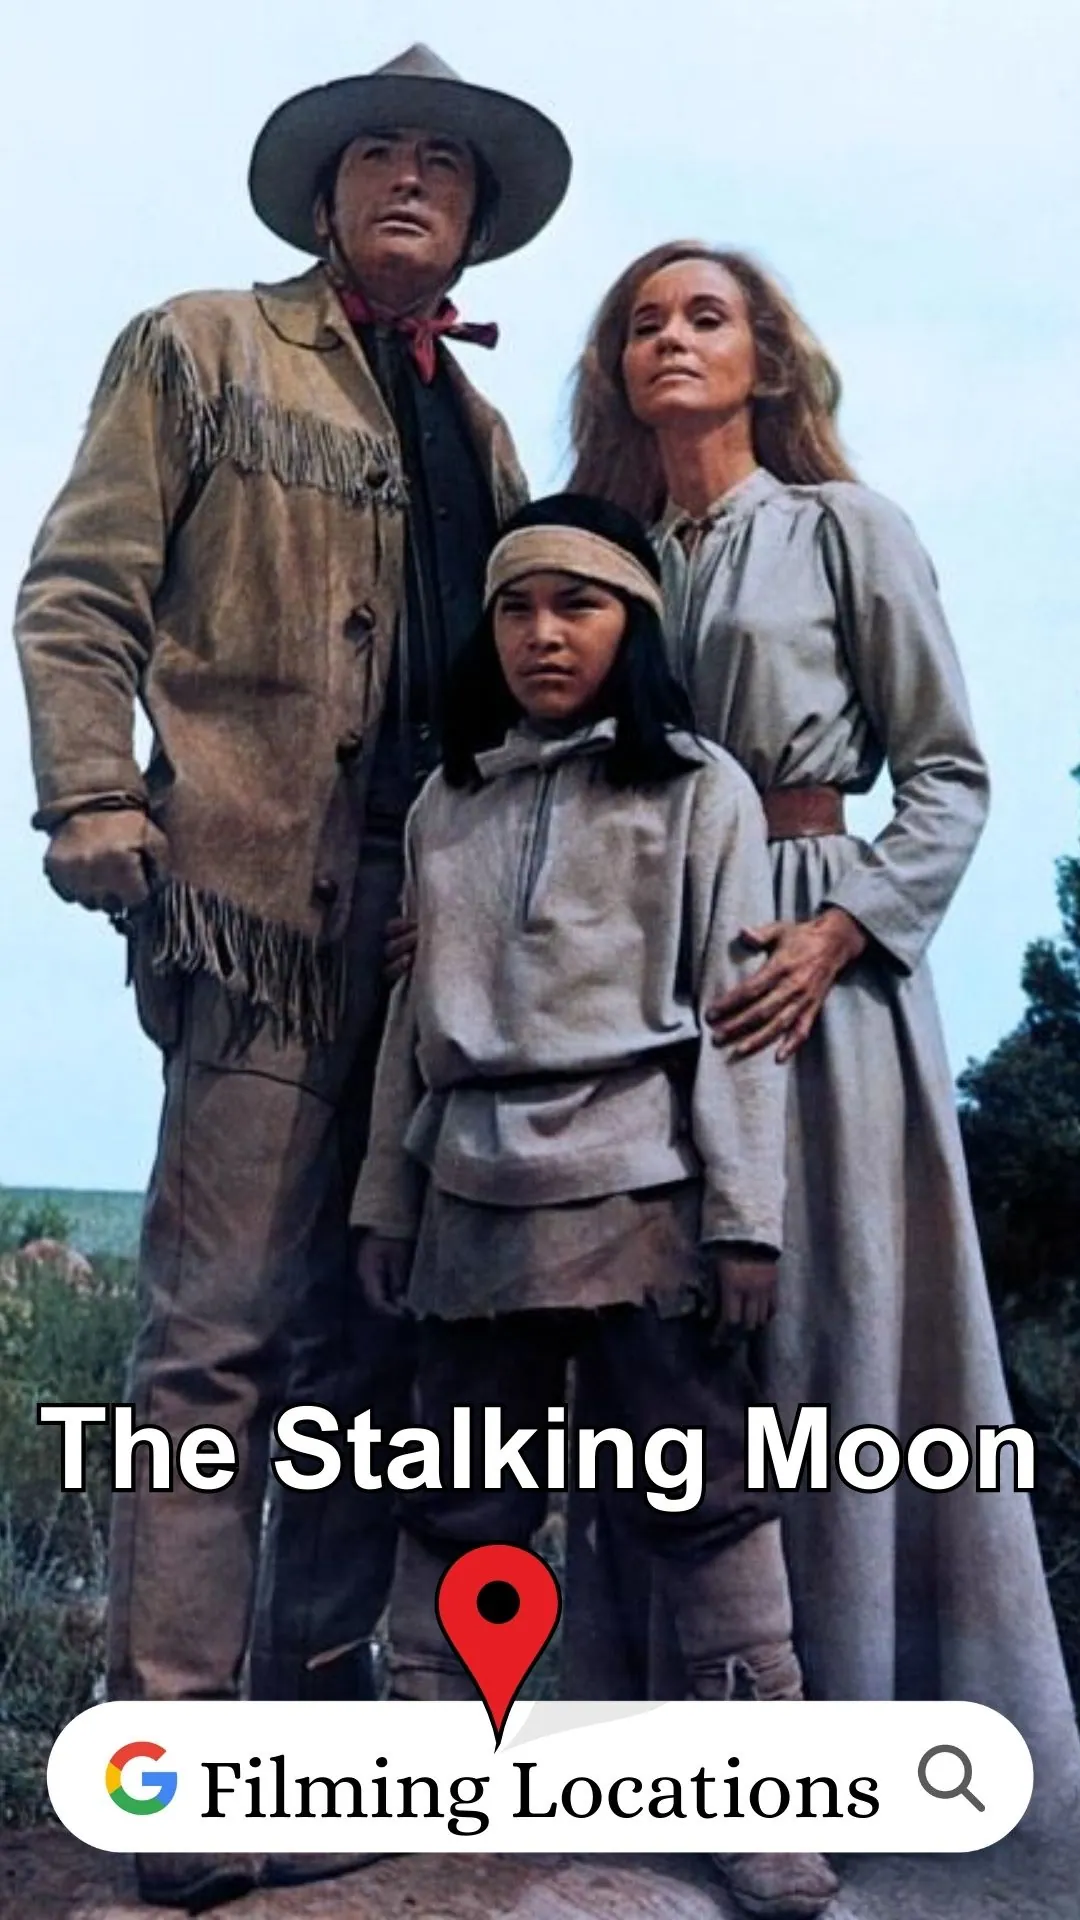 The Stalking Moon Filming Locations (1968)